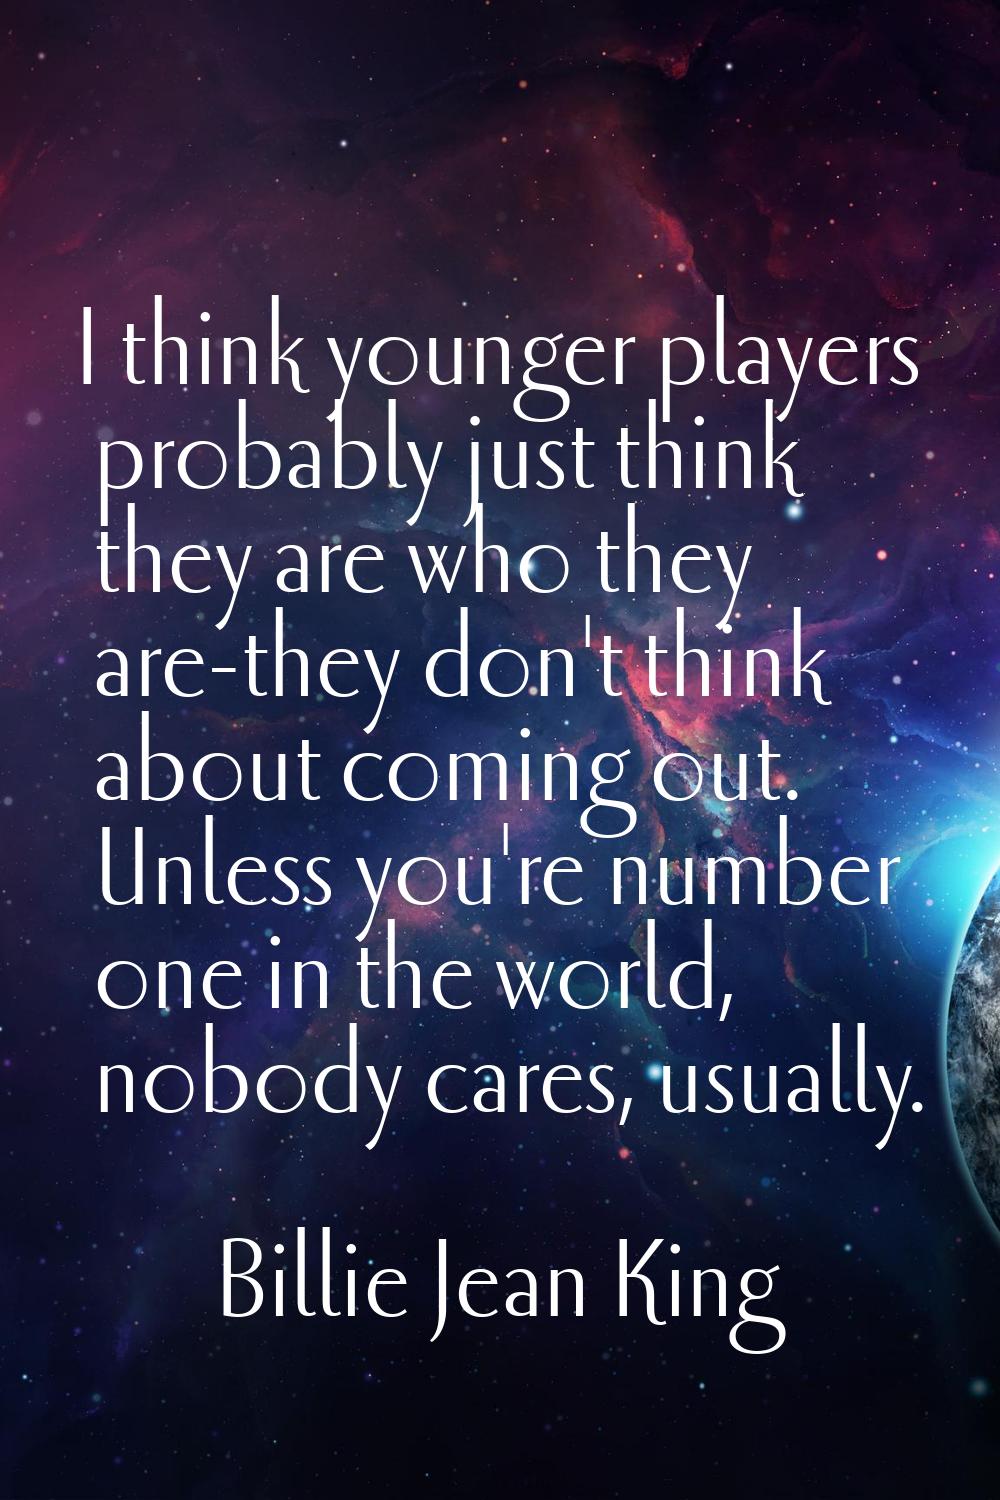 I think younger players probably just think they are who they are-they don't think about coming out